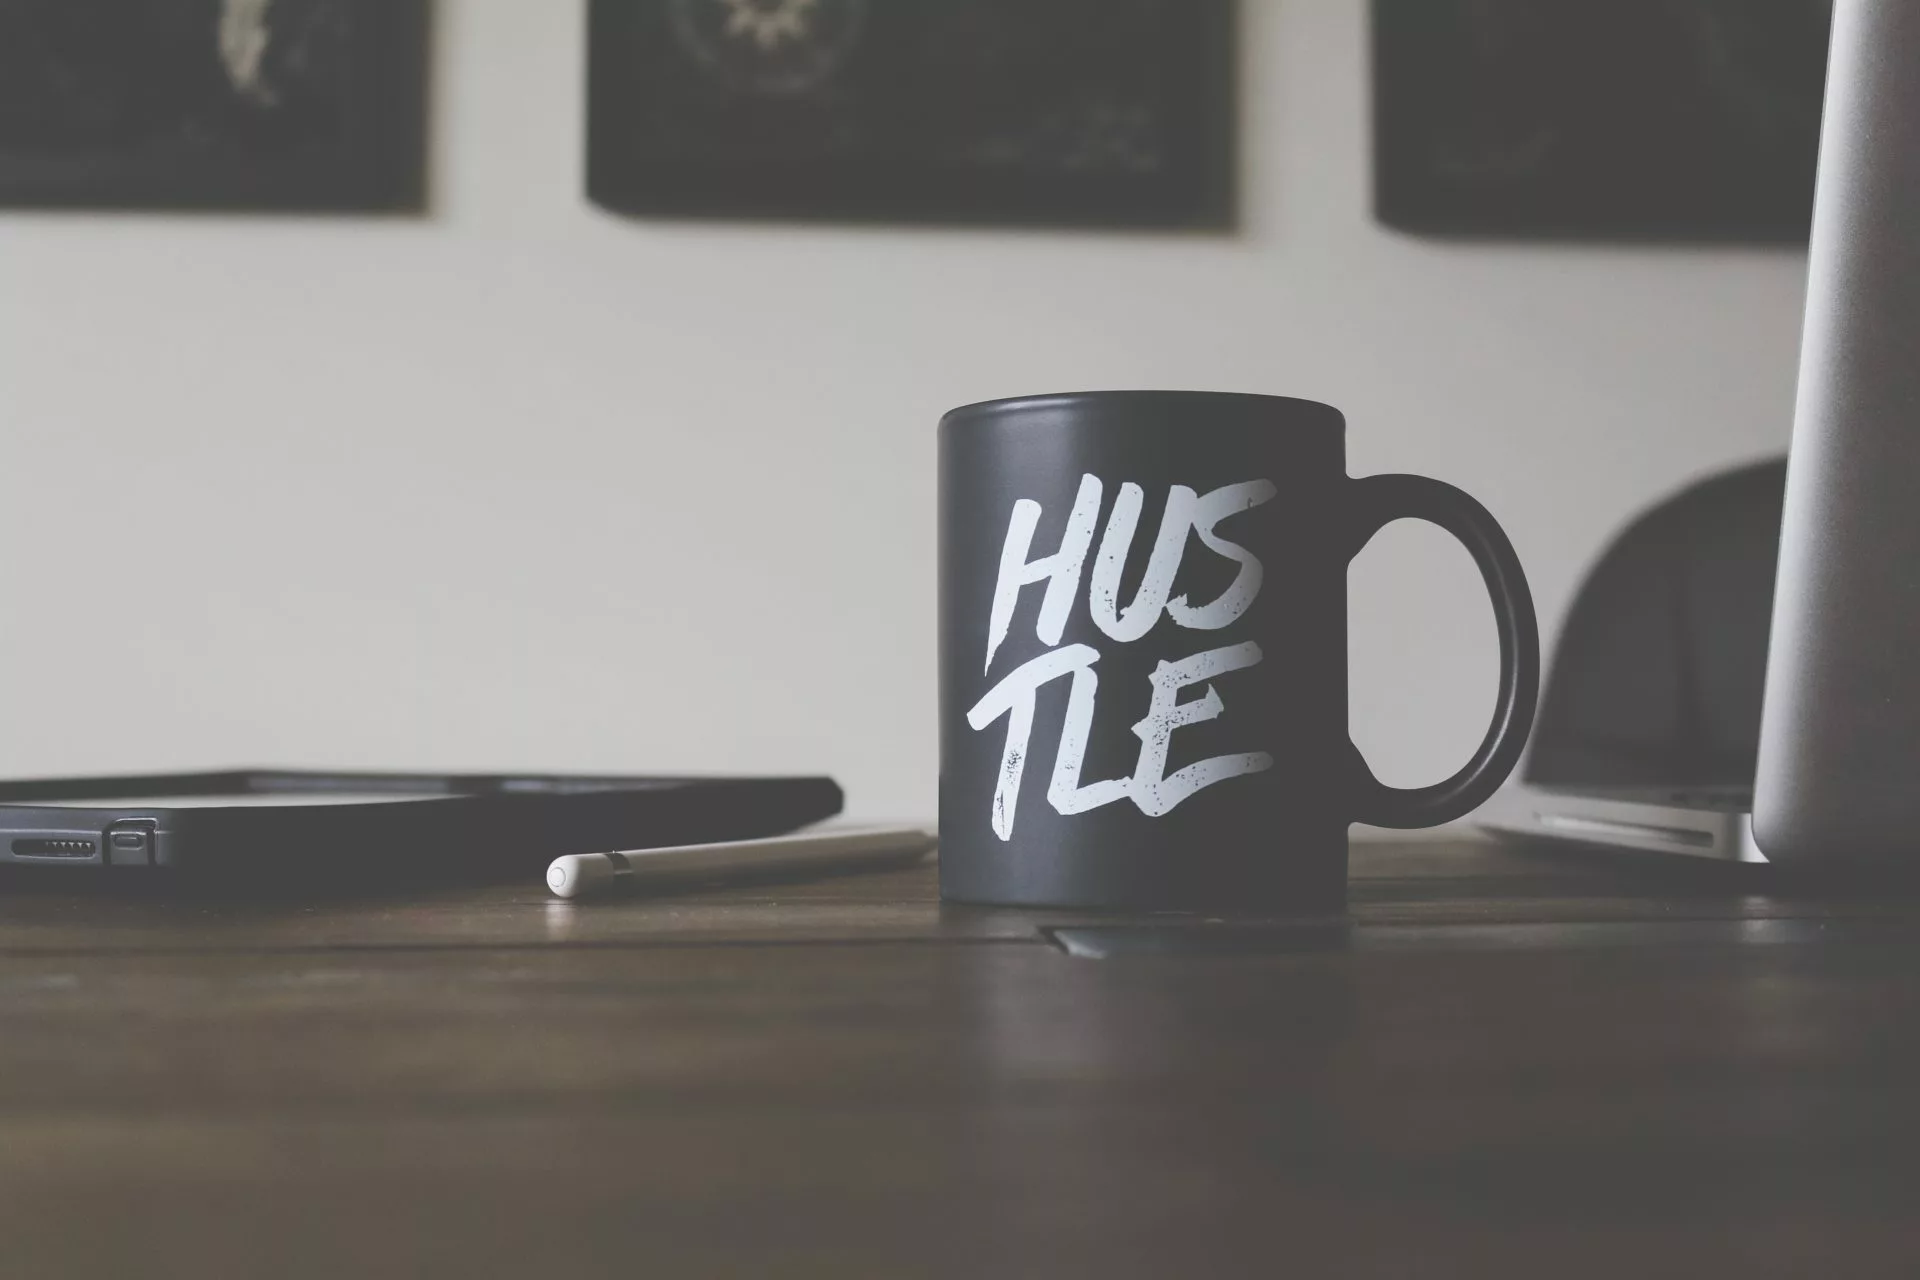 Hustle and grit, here's how to cultivate it